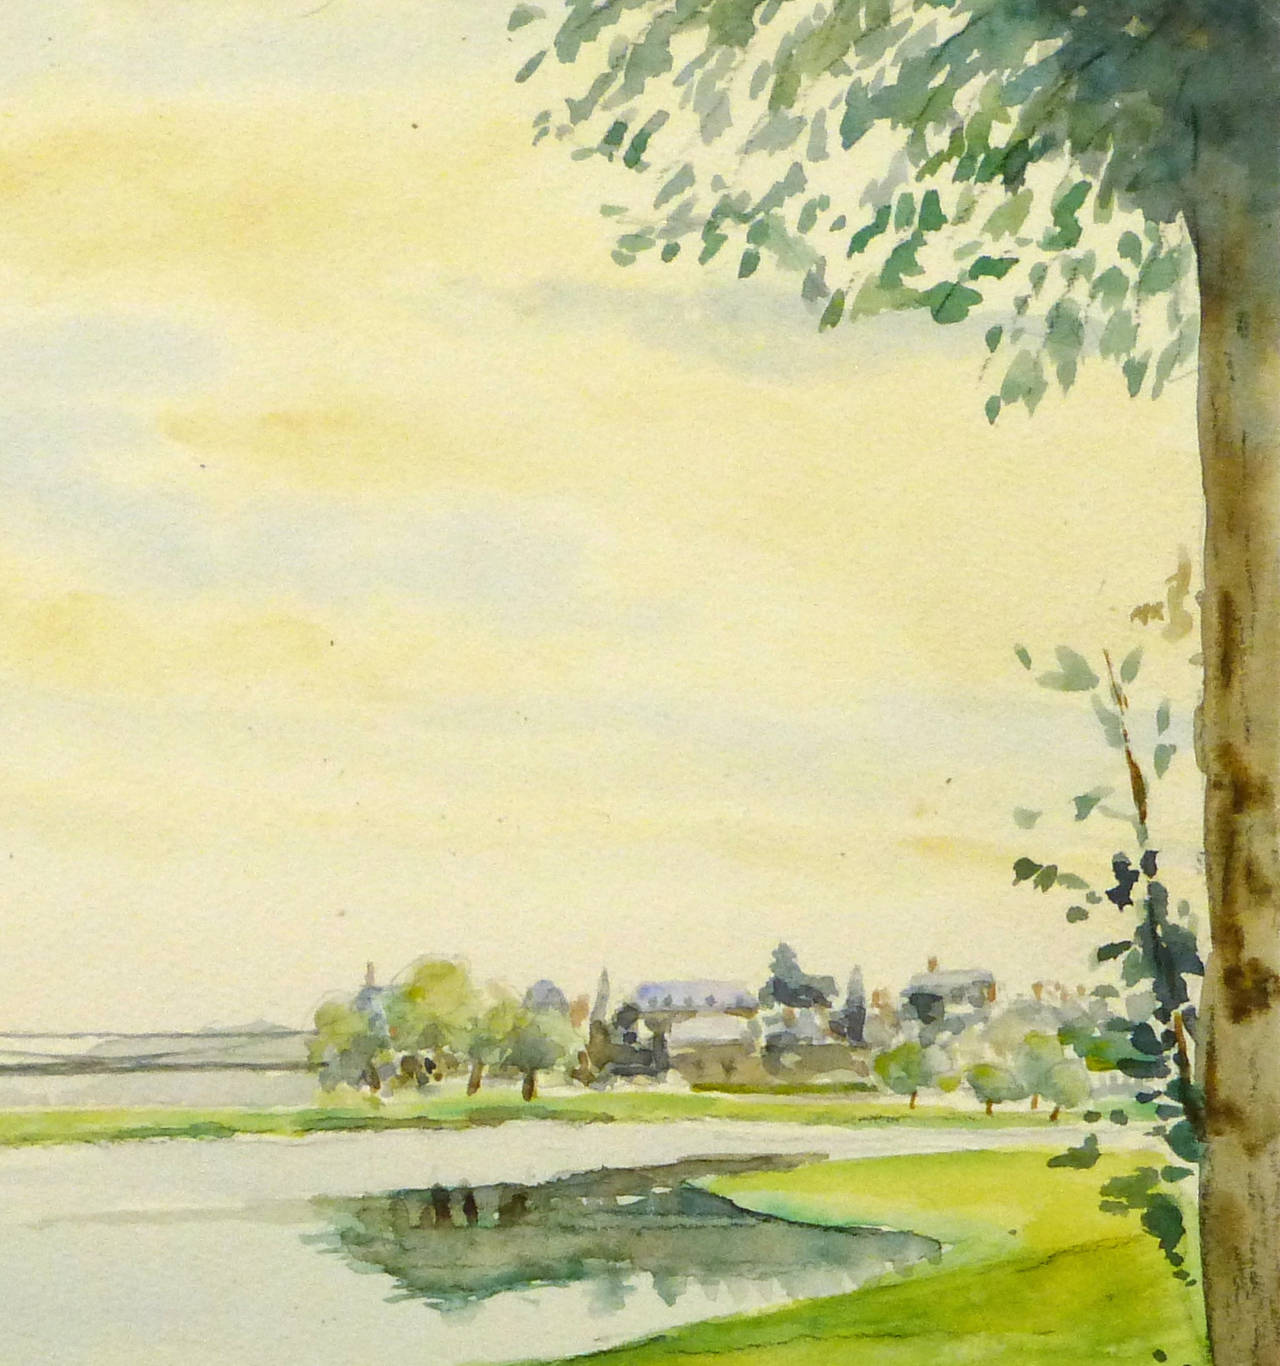 Vintage French Landscape Watercolor Painting - Art by C. Groux